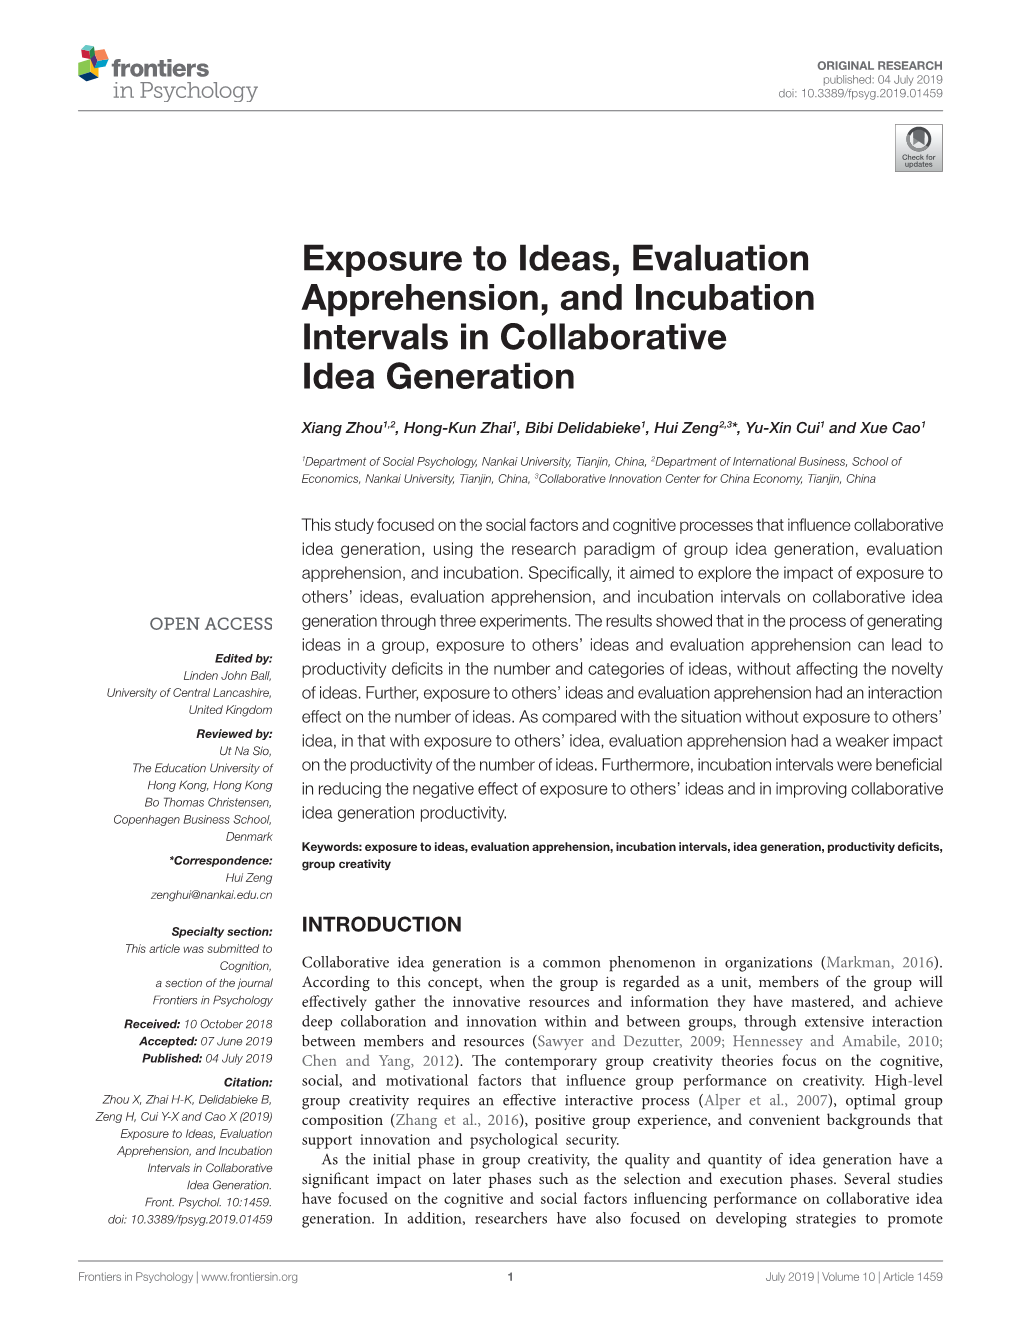 Exposure to Ideas, Evaluation Apprehension, and Incubation Intervals in Collaborative Idea Generation